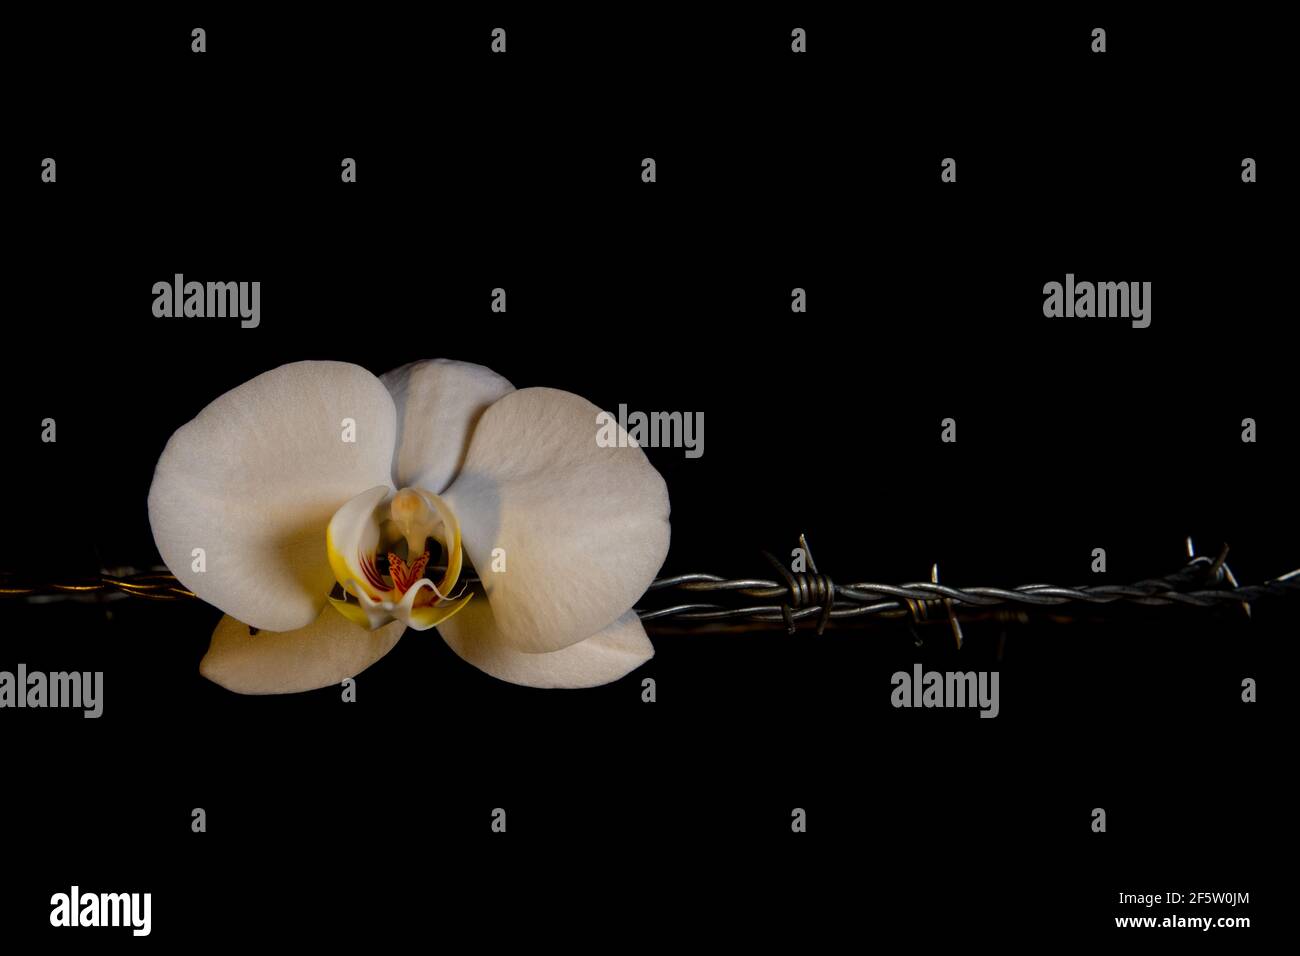 White orchid blossom and barbed wire isolated on black background, concept of femininity and pain Stock Photo